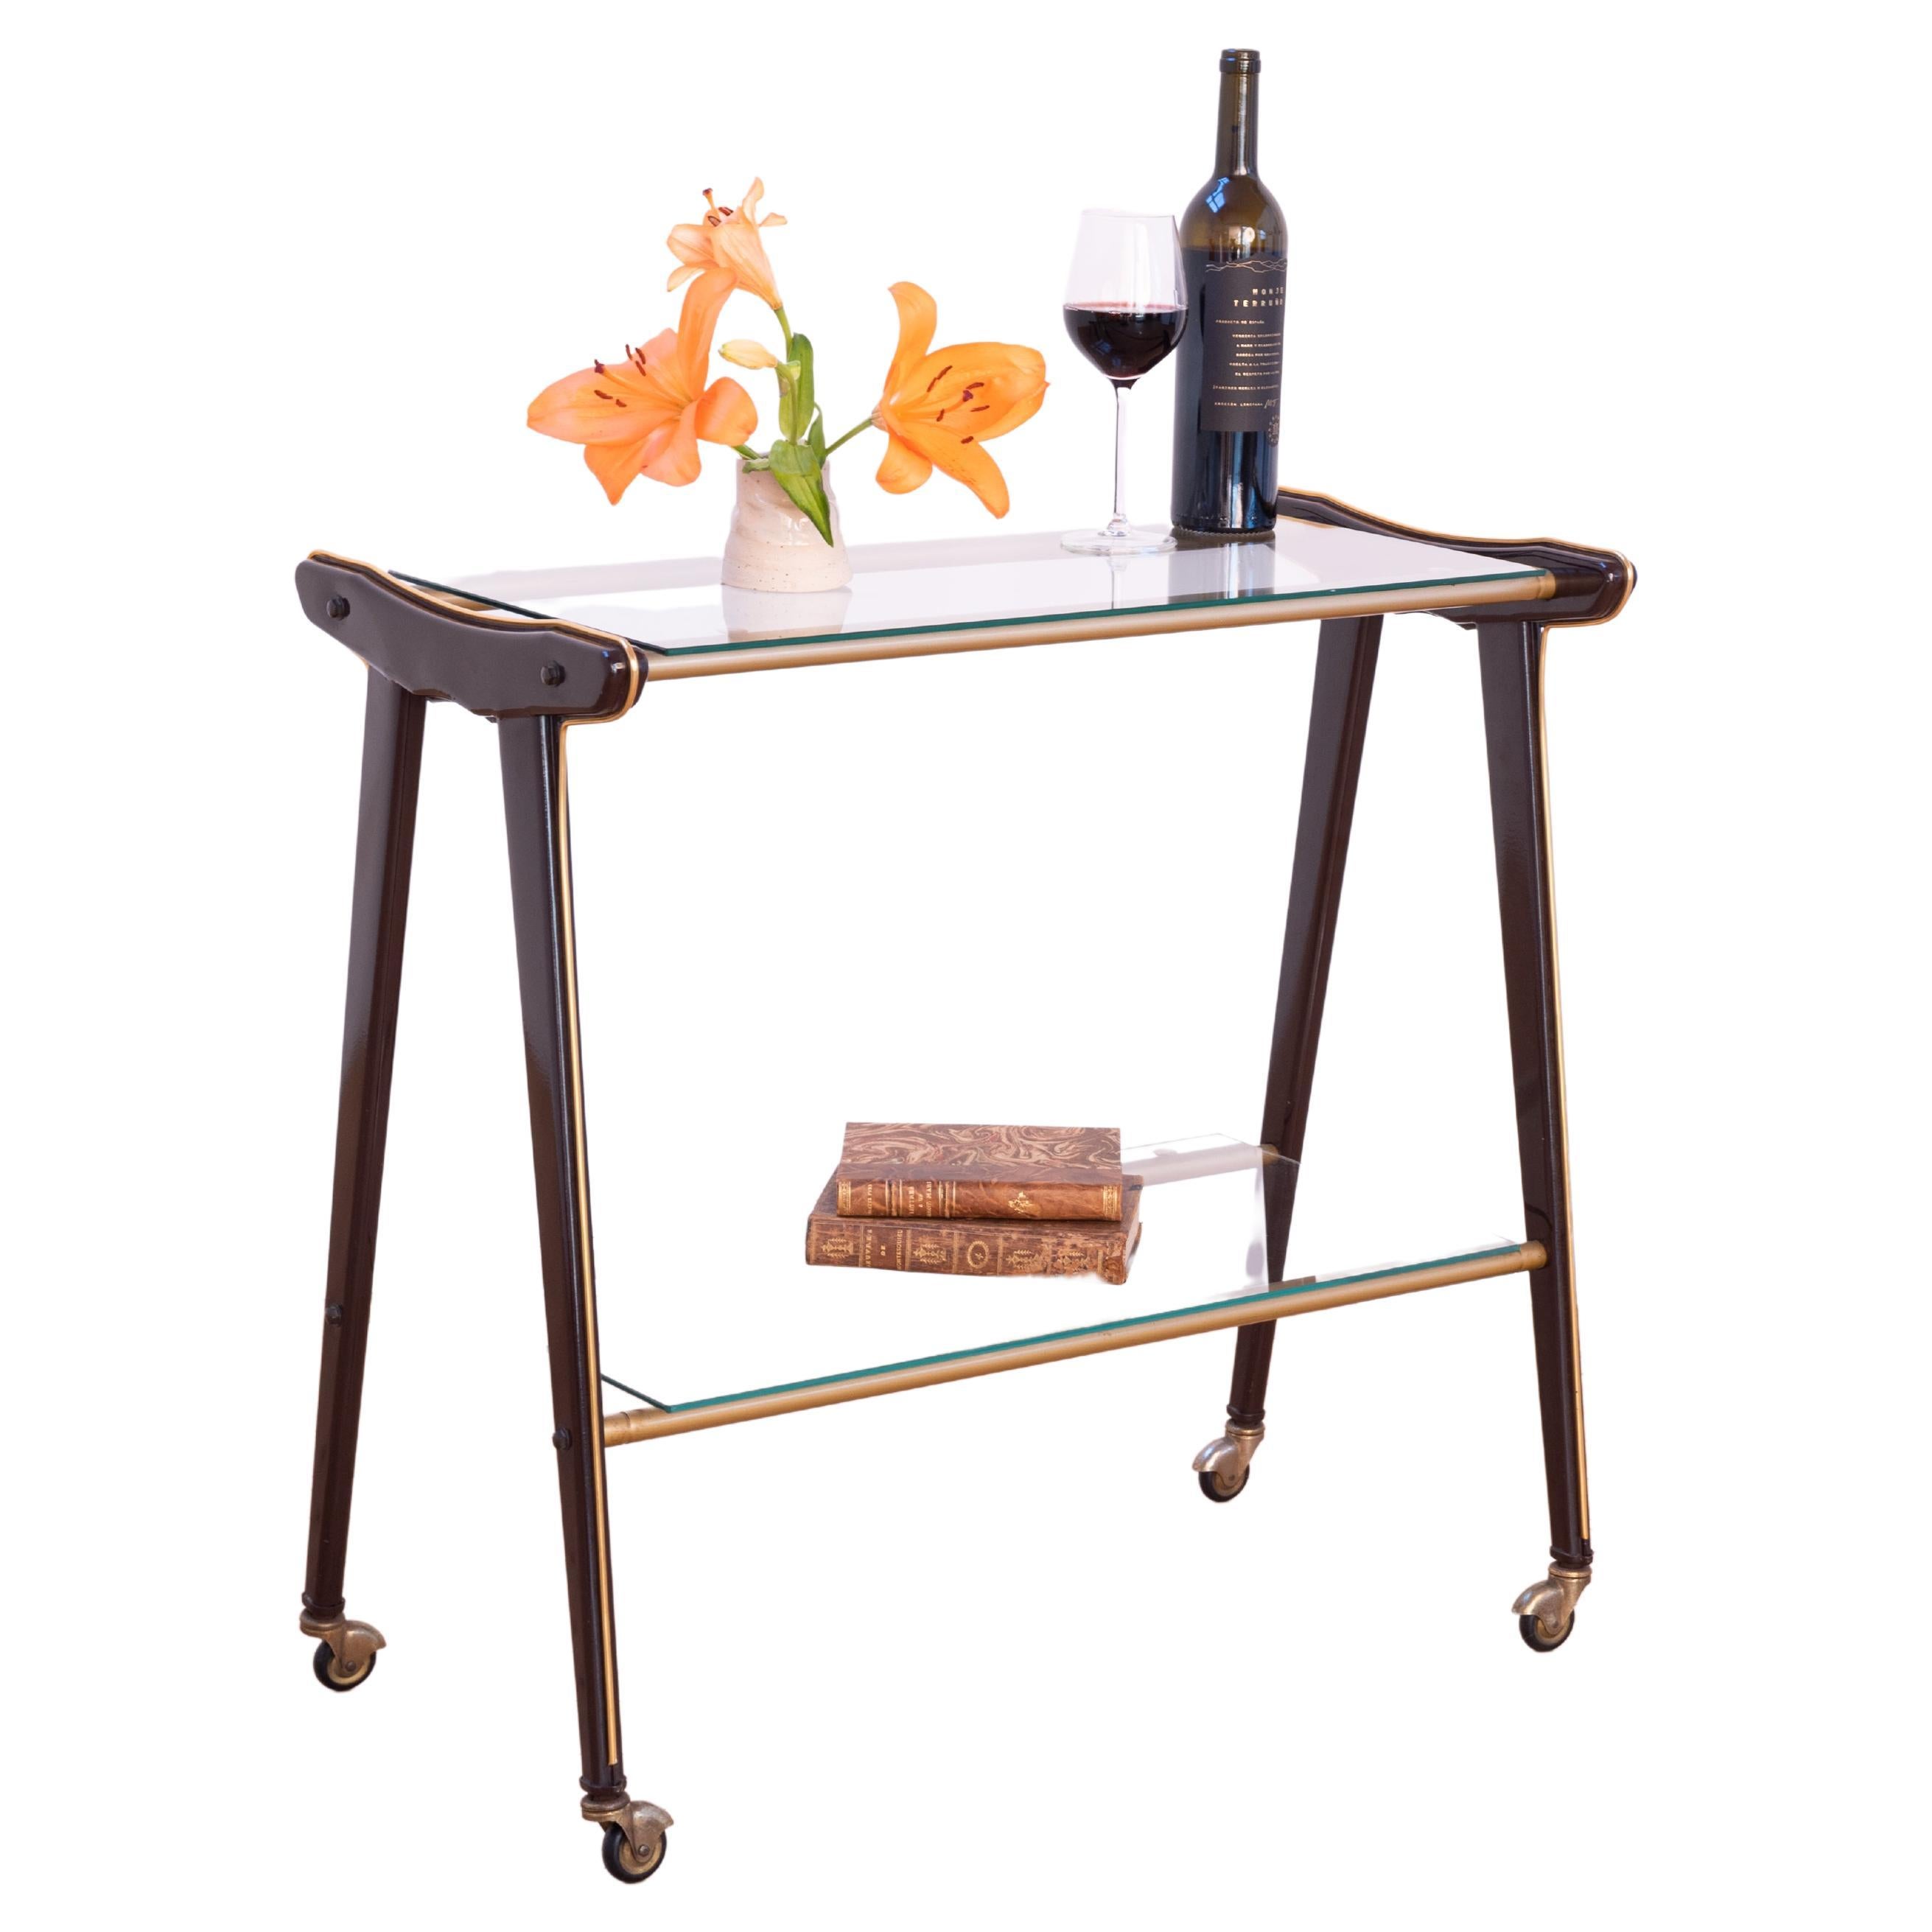 Vintage 1960s Bar Cart on Wheels, with 2 Glass Shelves and Details in Brass